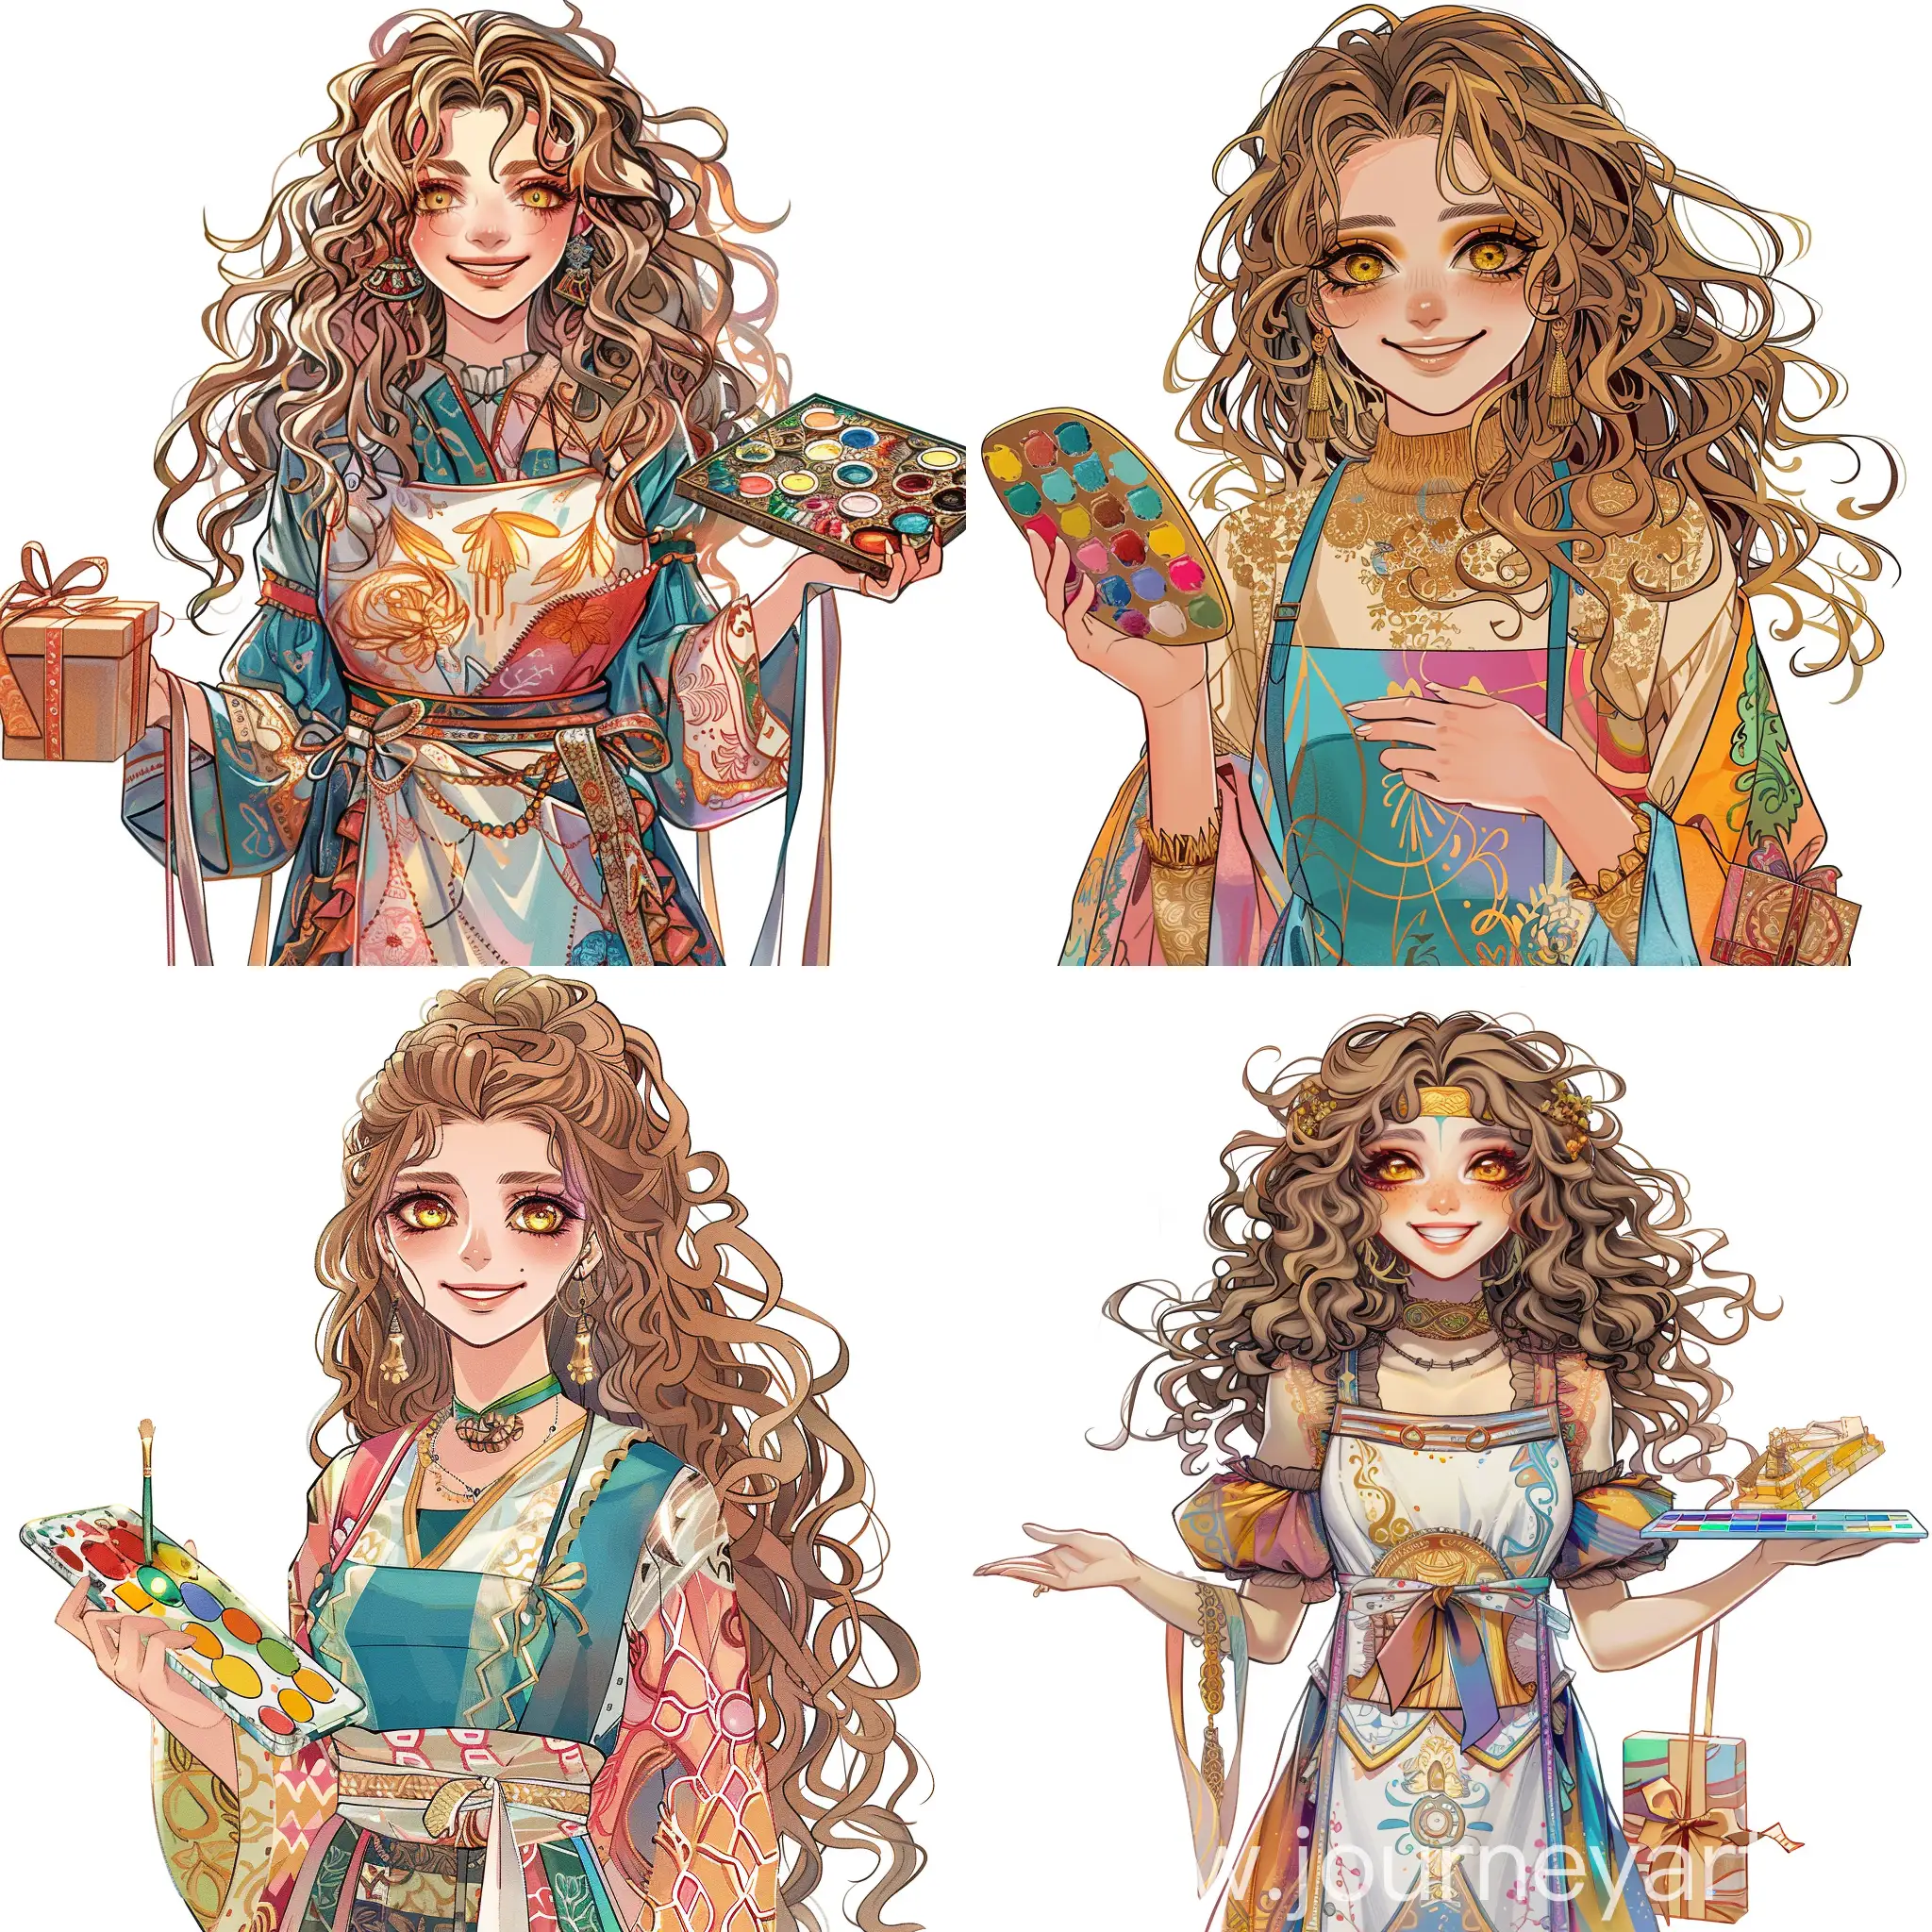 A (((cute Lebanese anime artist woman holding a paint pallette and a gift box ))), with long face, spiral frizzy curly light brown hair and striking, uplifted (((bright yellowish eyes))), with eyeliner, wearing a colorful, artfully drawn drawing apron and long, intricate clothing, smiling all against a (((white background)))